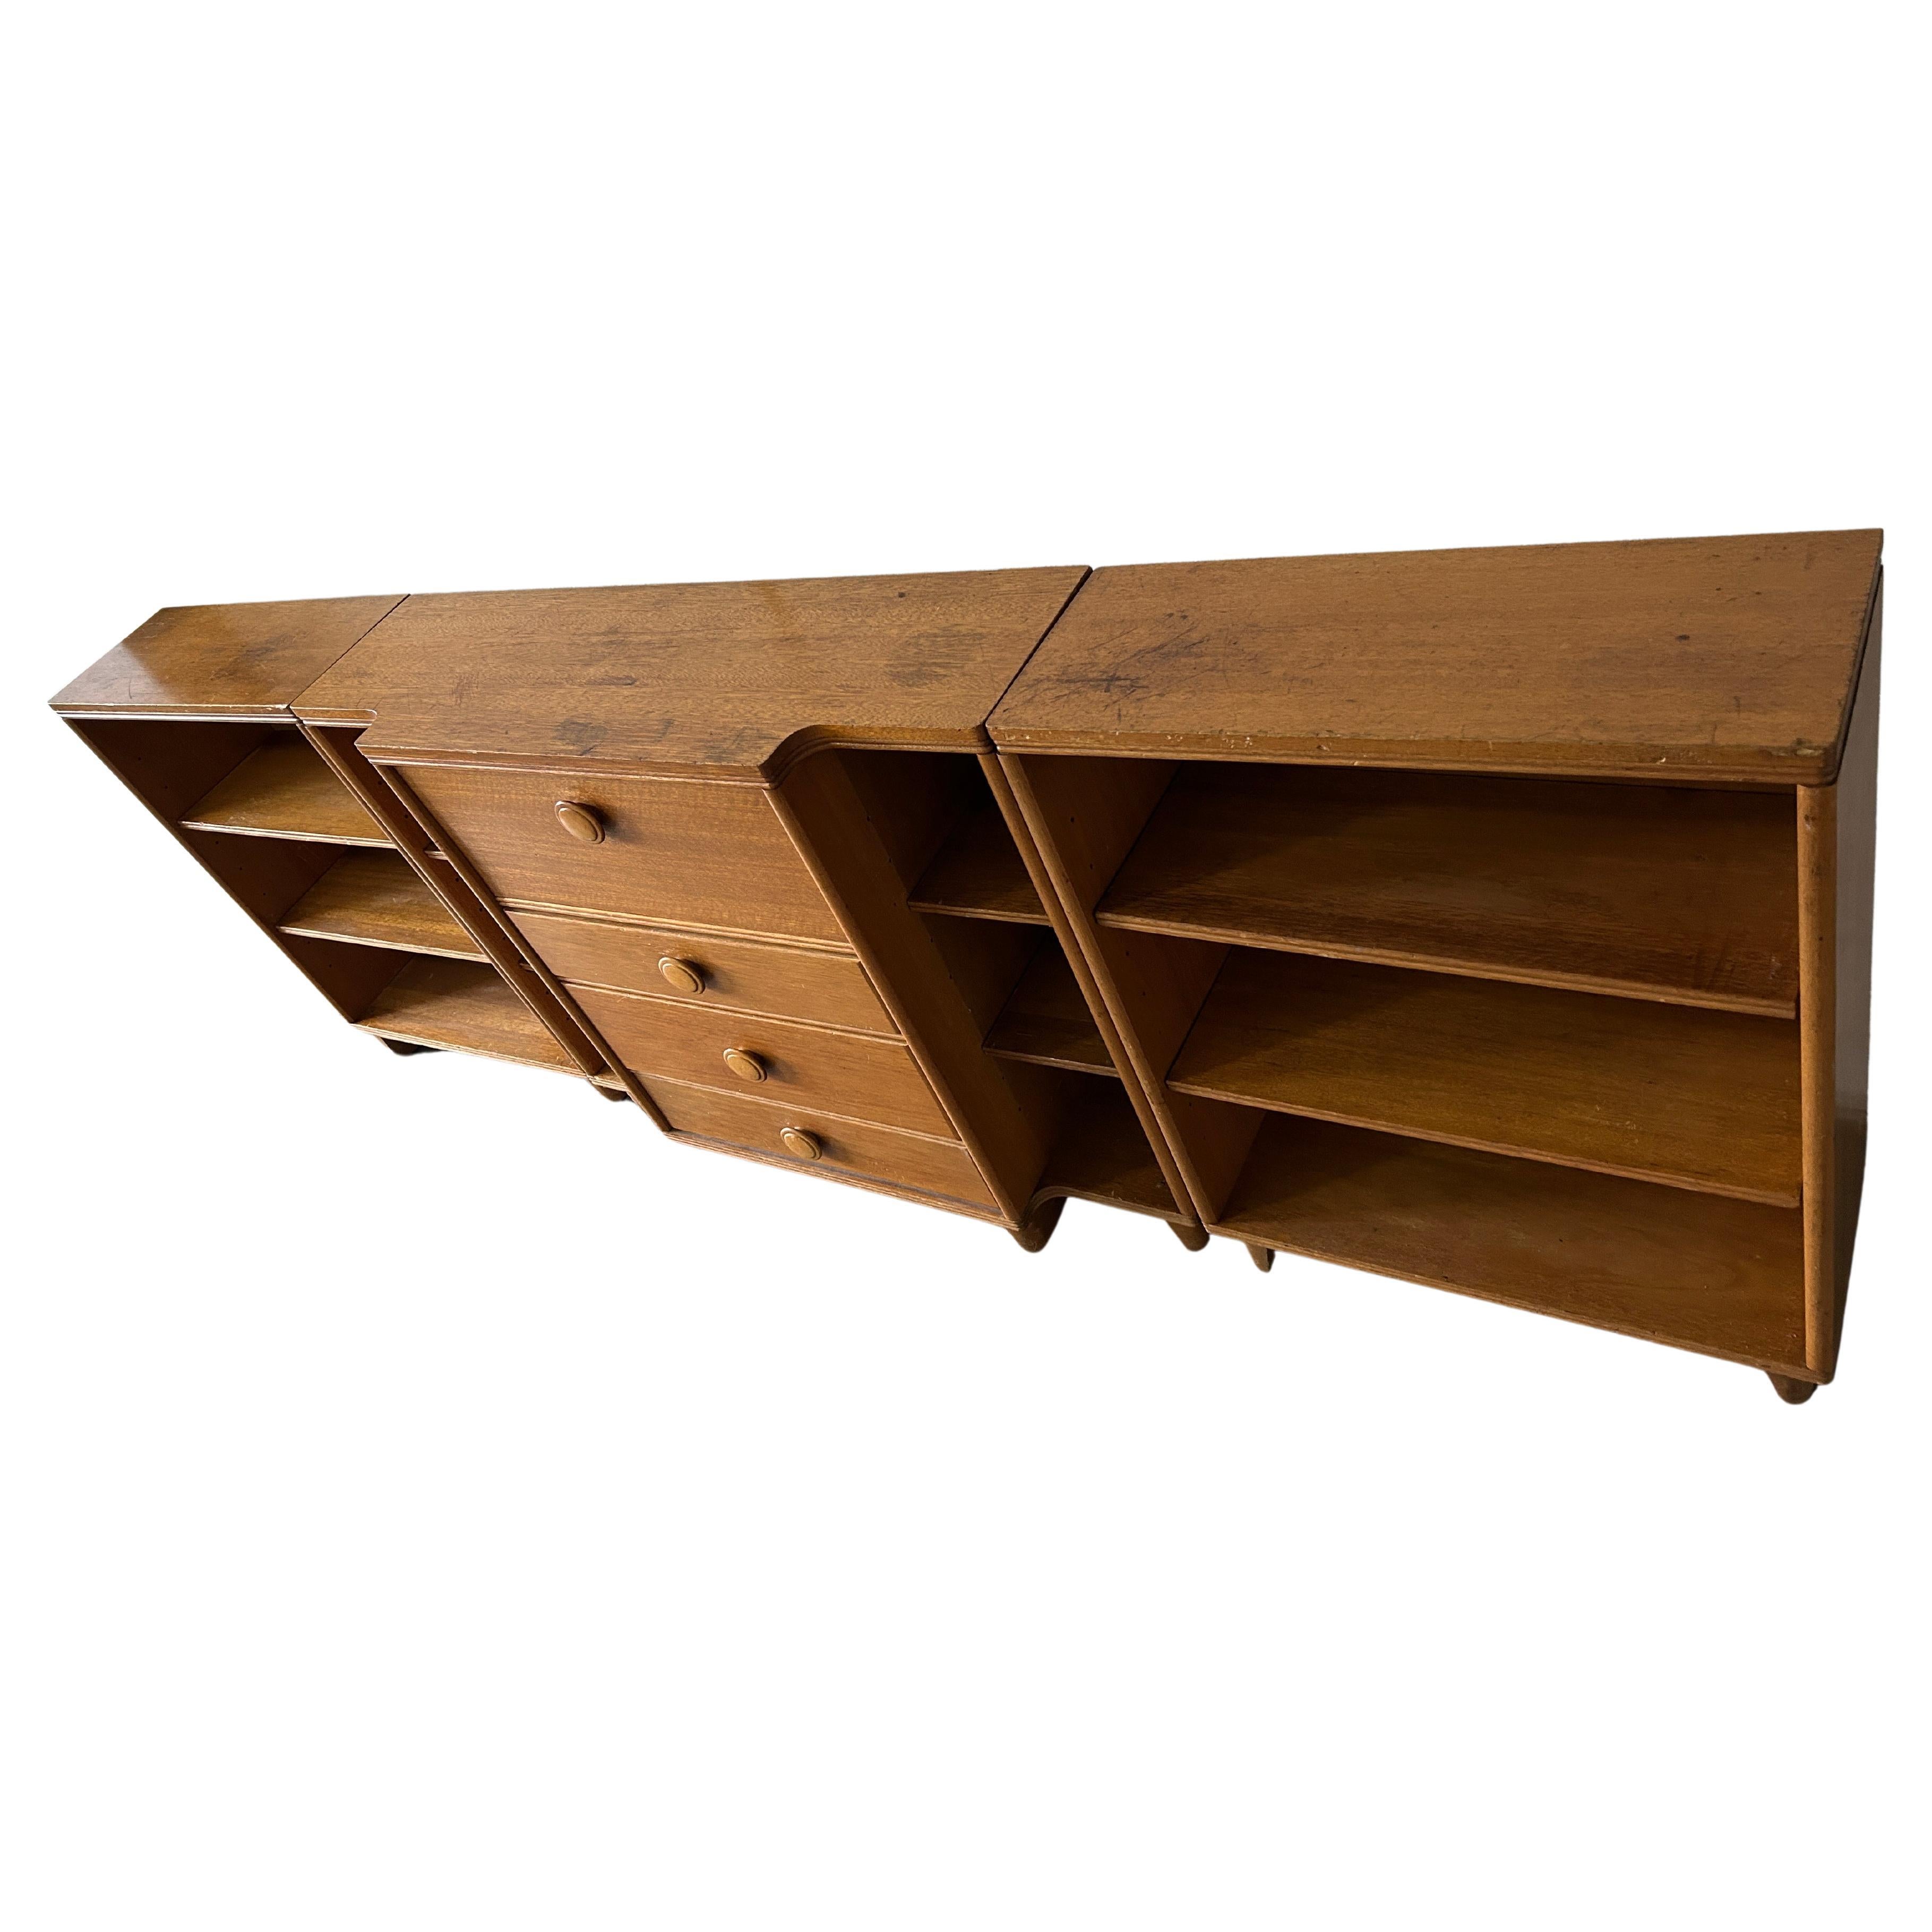 Deco Mid-Century Modern flip down desk with 3 lower drawers and 2 matching bookcases. The shelves are all adjustable or removable. The center top flips down into a desk and has a removable organizer. The center unit has narrow shelves on the left